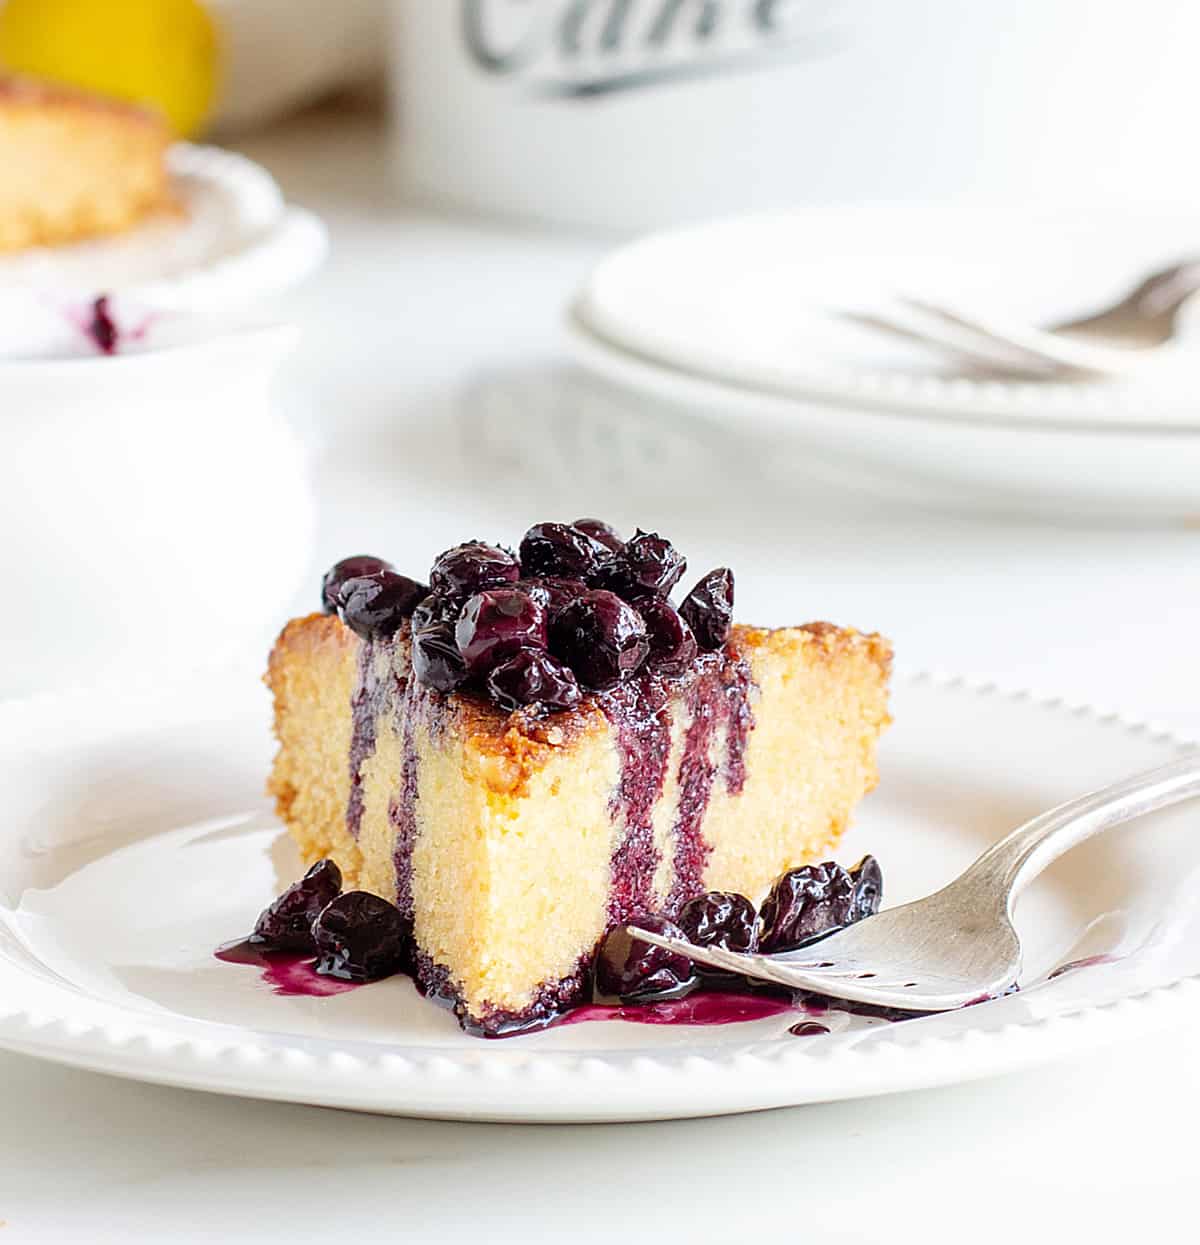 Slice of lemon cake with blueberry sauce on white plate, silver fork, white props on background